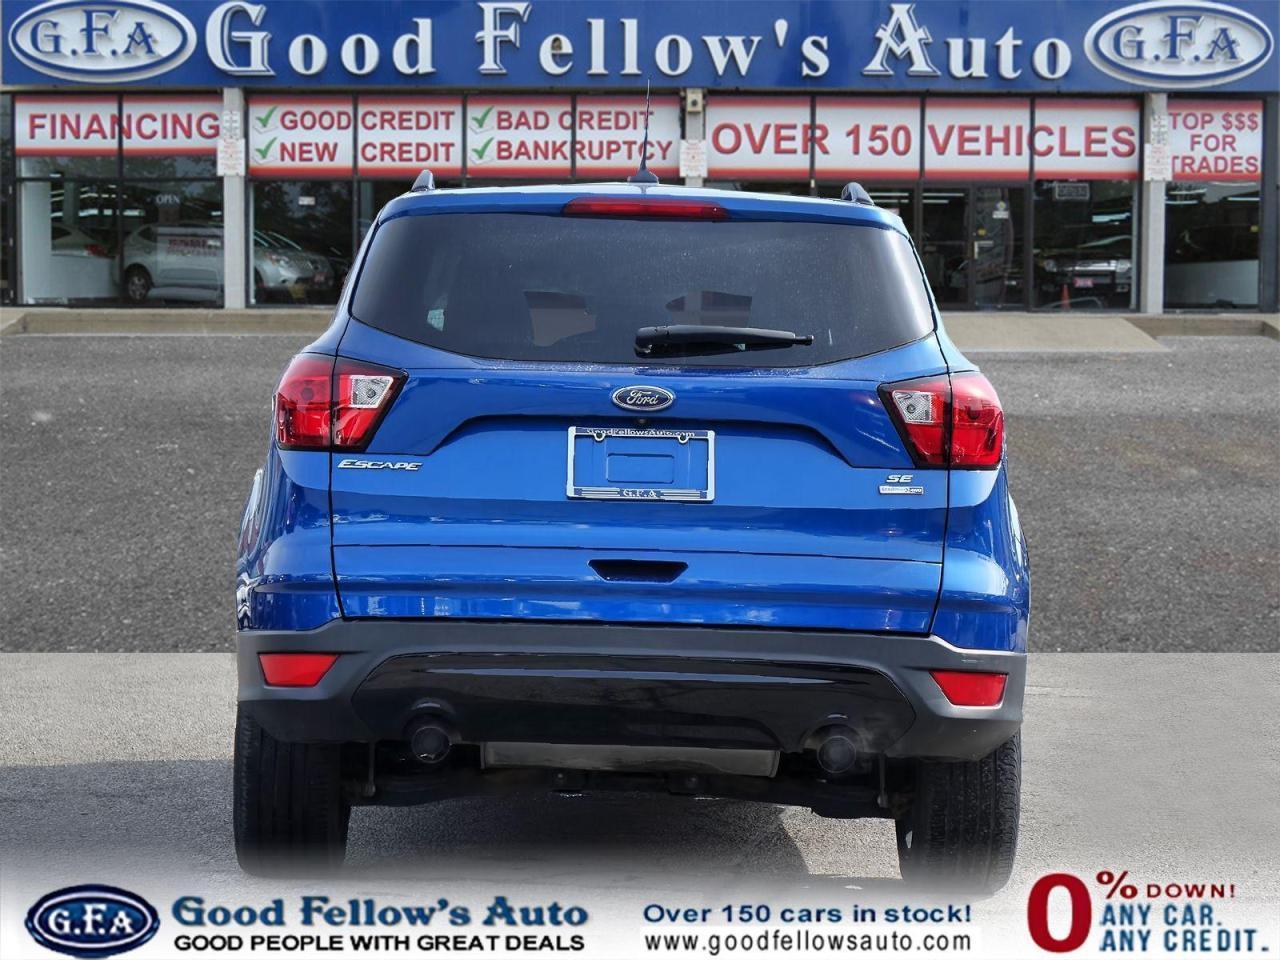 2019 Ford Escape SE MODEL, AWD, REARVIEW CAMERA, HEATED SEATS, POWE - Photo #4